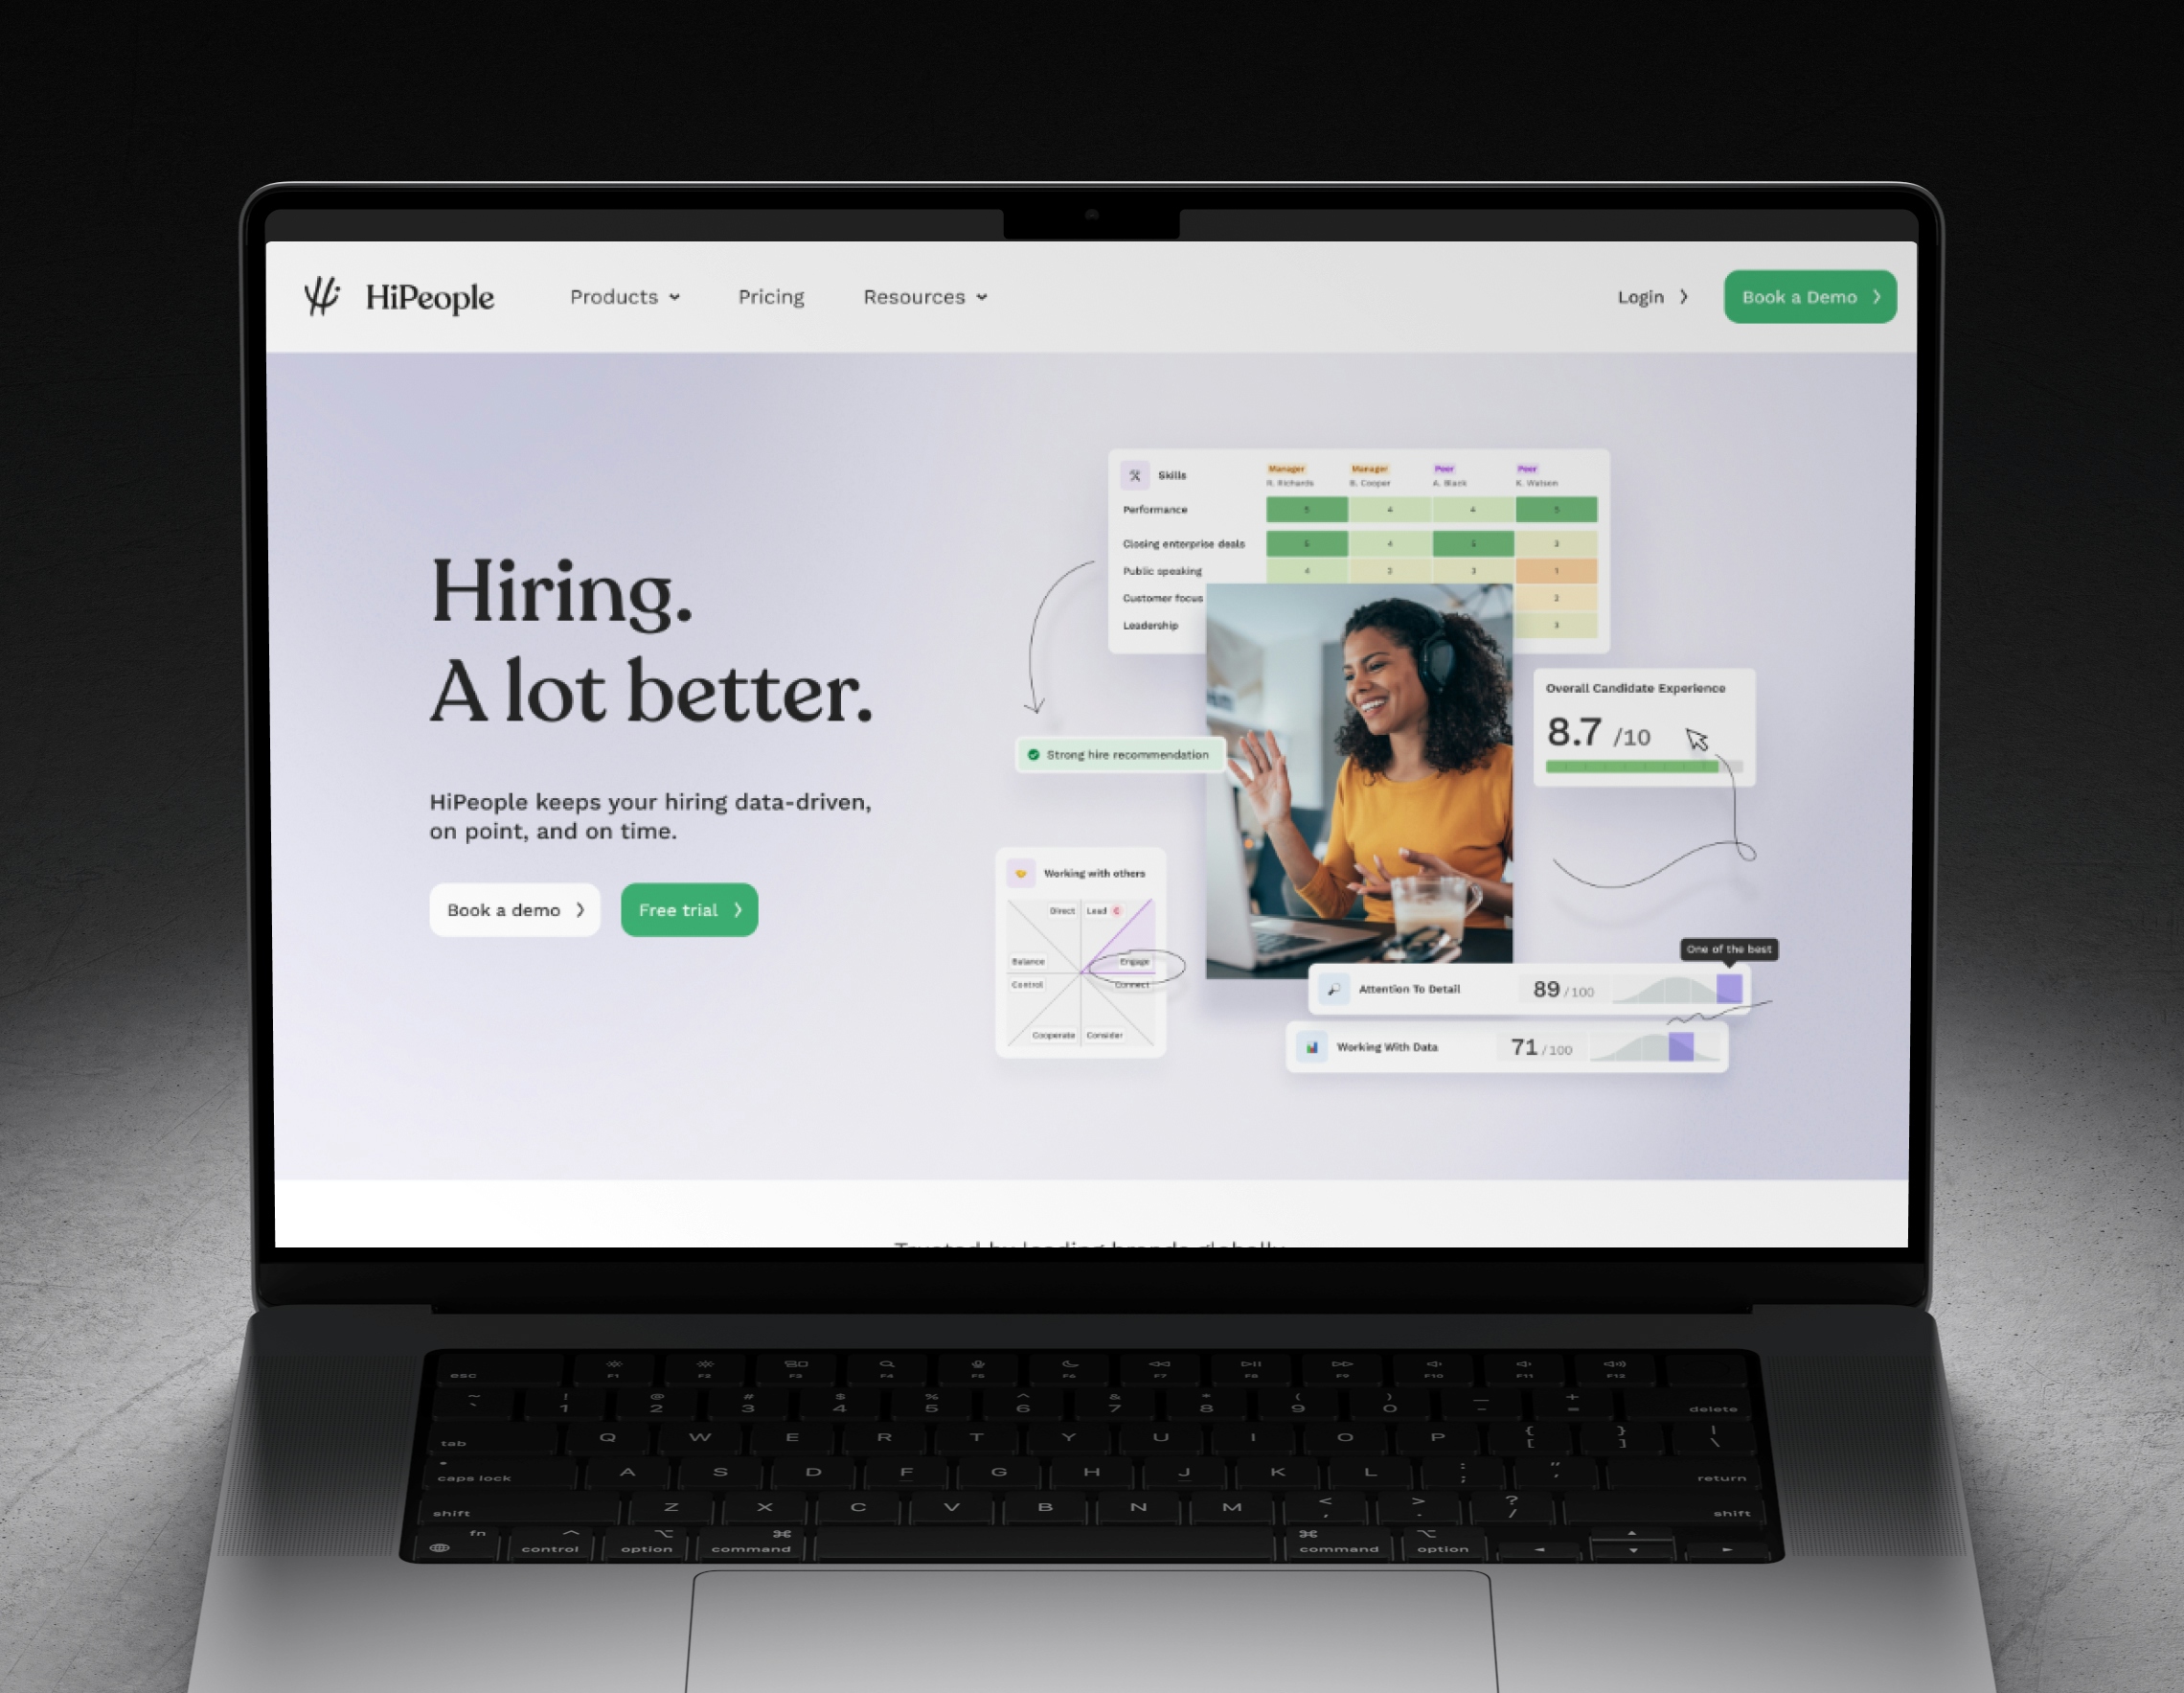 HiPeople Marketing Website Redesign: Branding and UI Elements